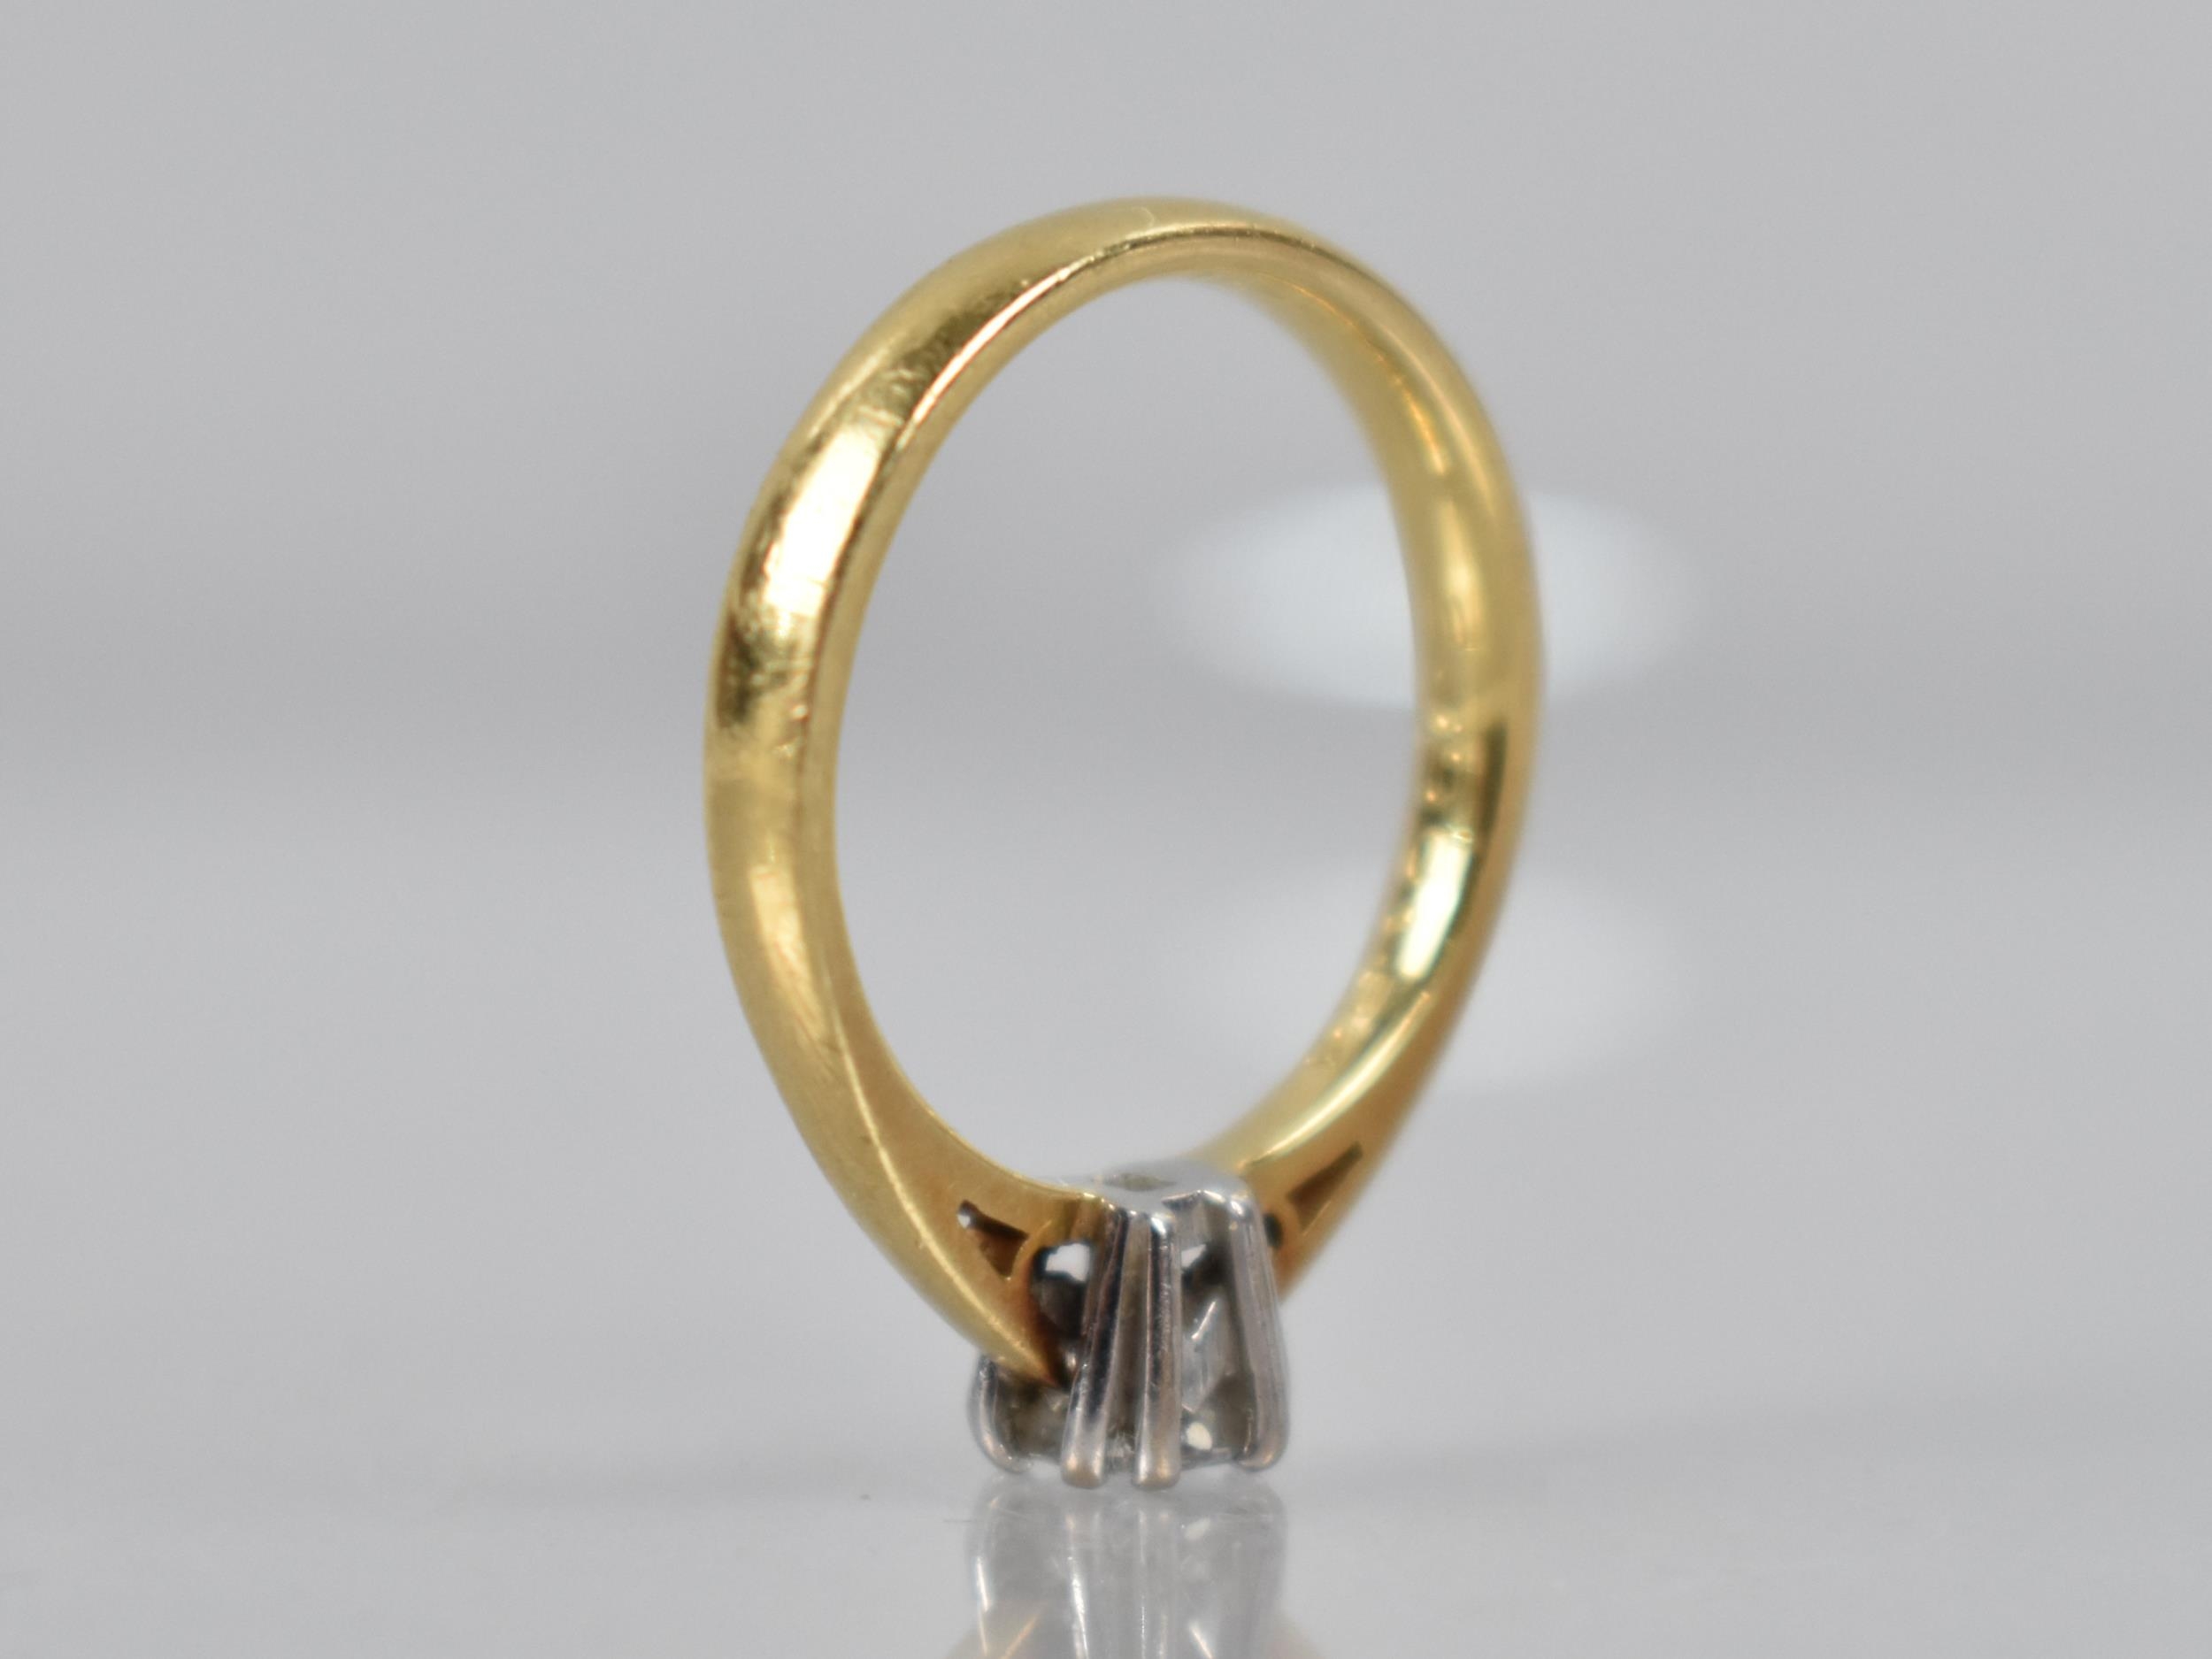 A 18ct Gold Princess Cut Diamond Solitaire Ring, Stone Measuring 3.75x3.9mm (Approx 0.37ct), Set - Image 3 of 4